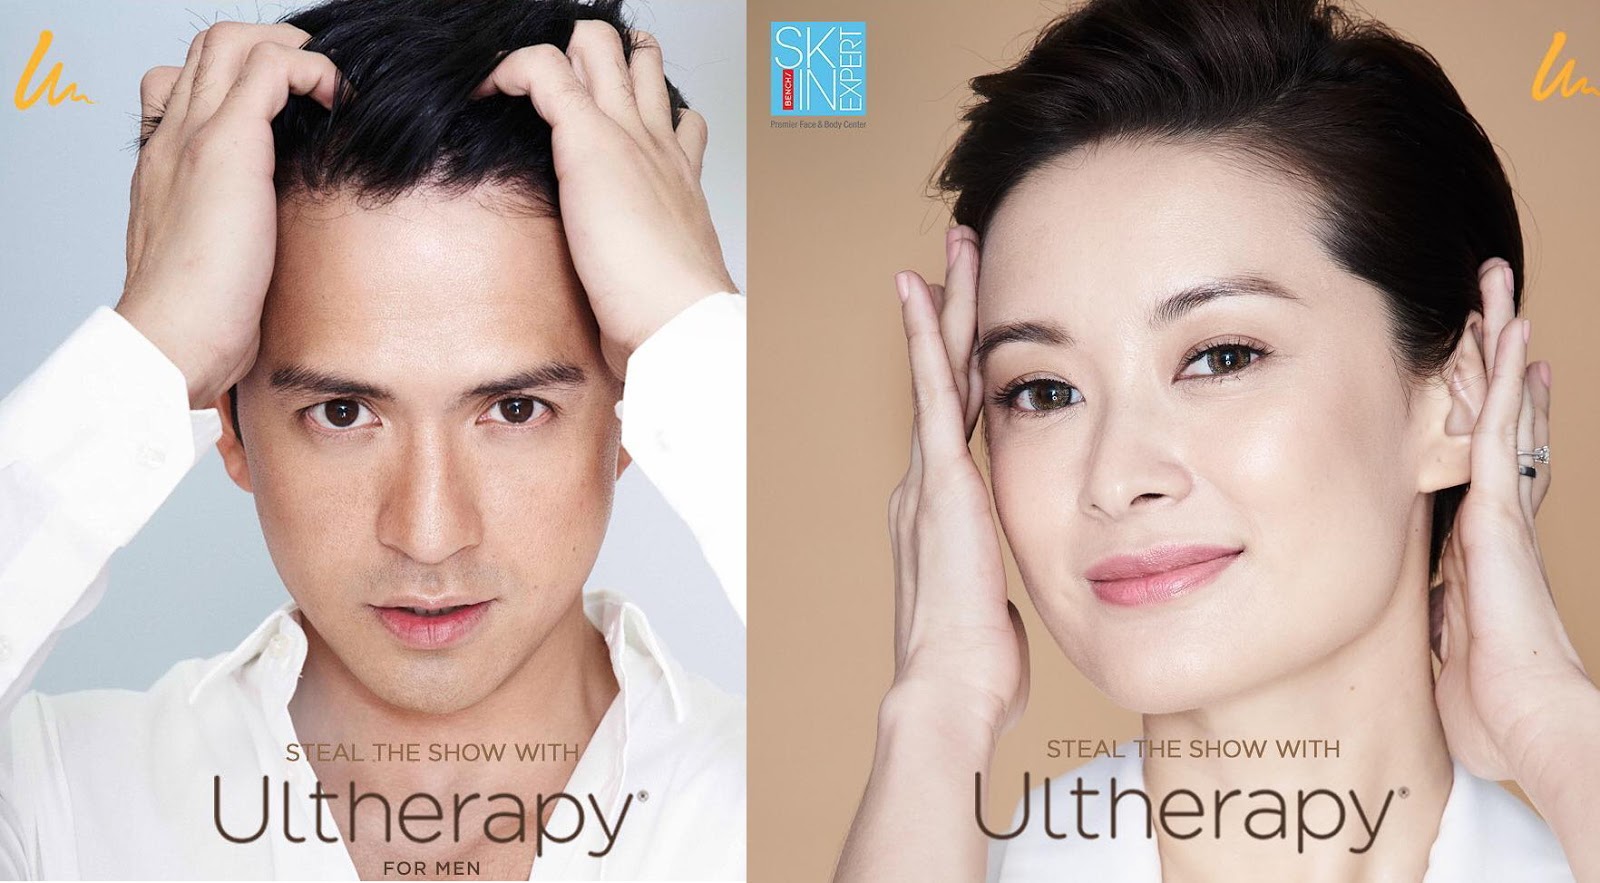 Sand Under My Feet Ultherapy Launch At Bench Skin Expert